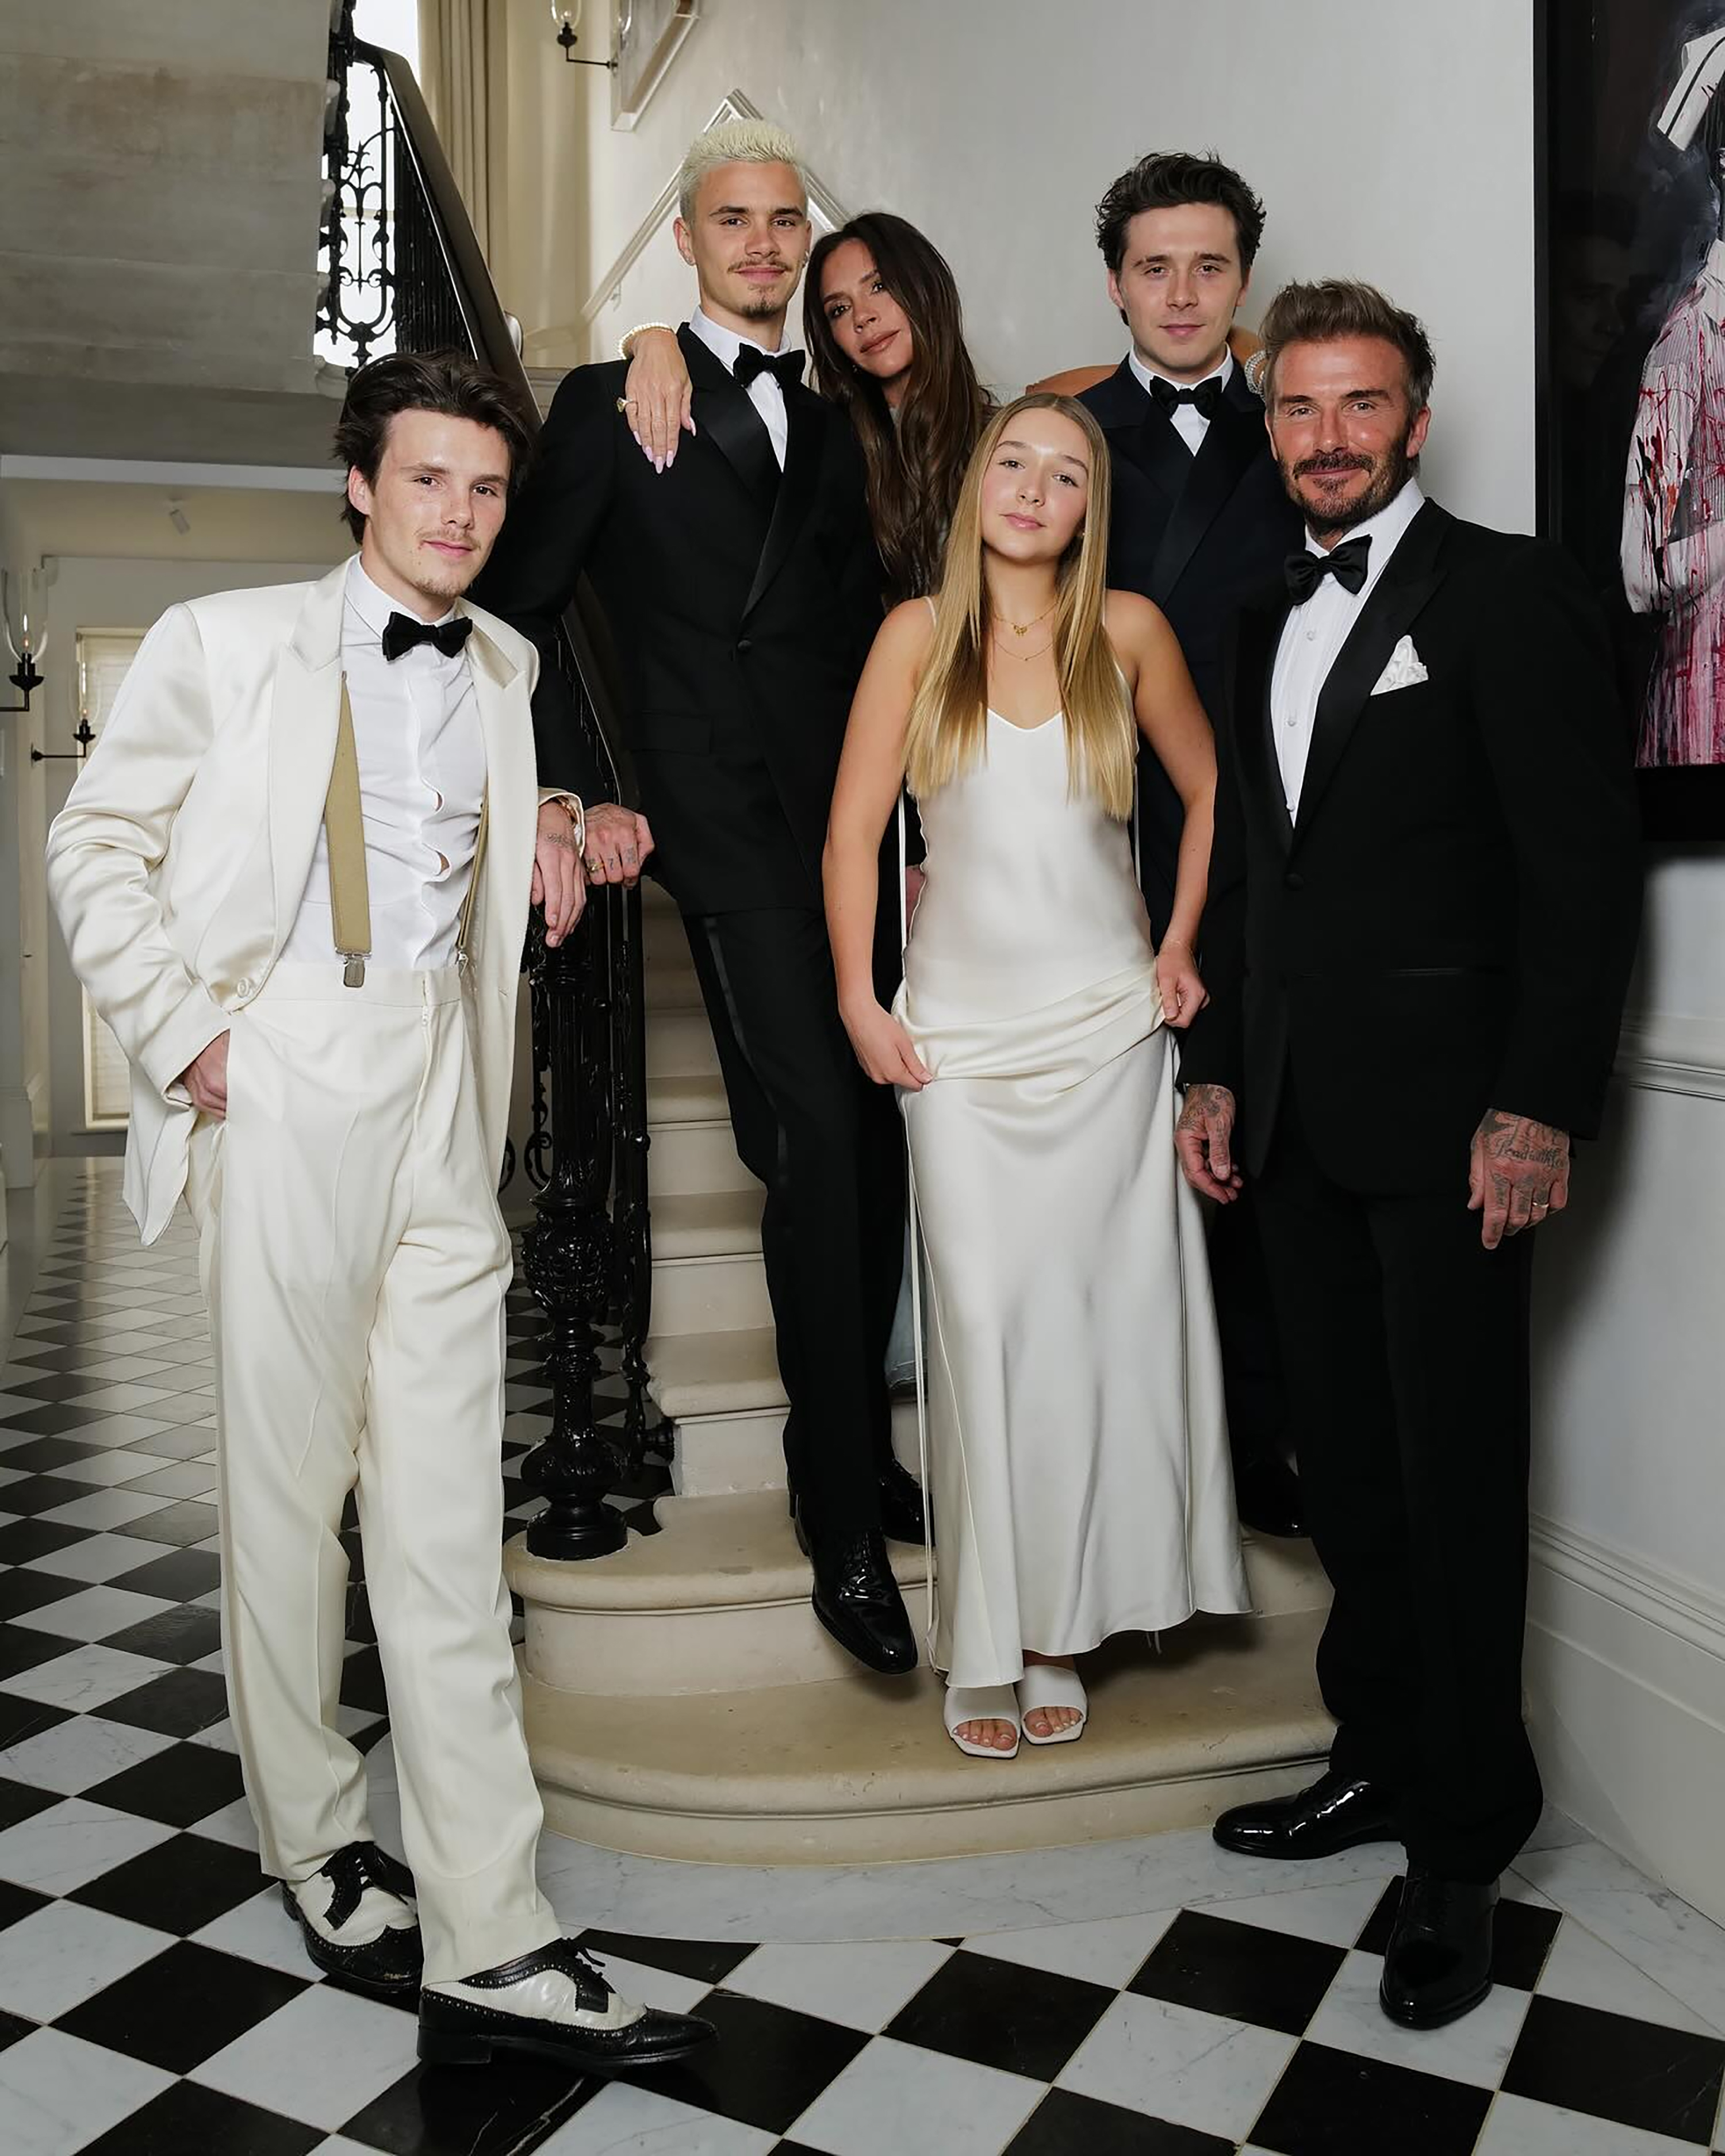 The Beckhams were all smiles as they stood together for photographers at the exclusive Oswald’s venue